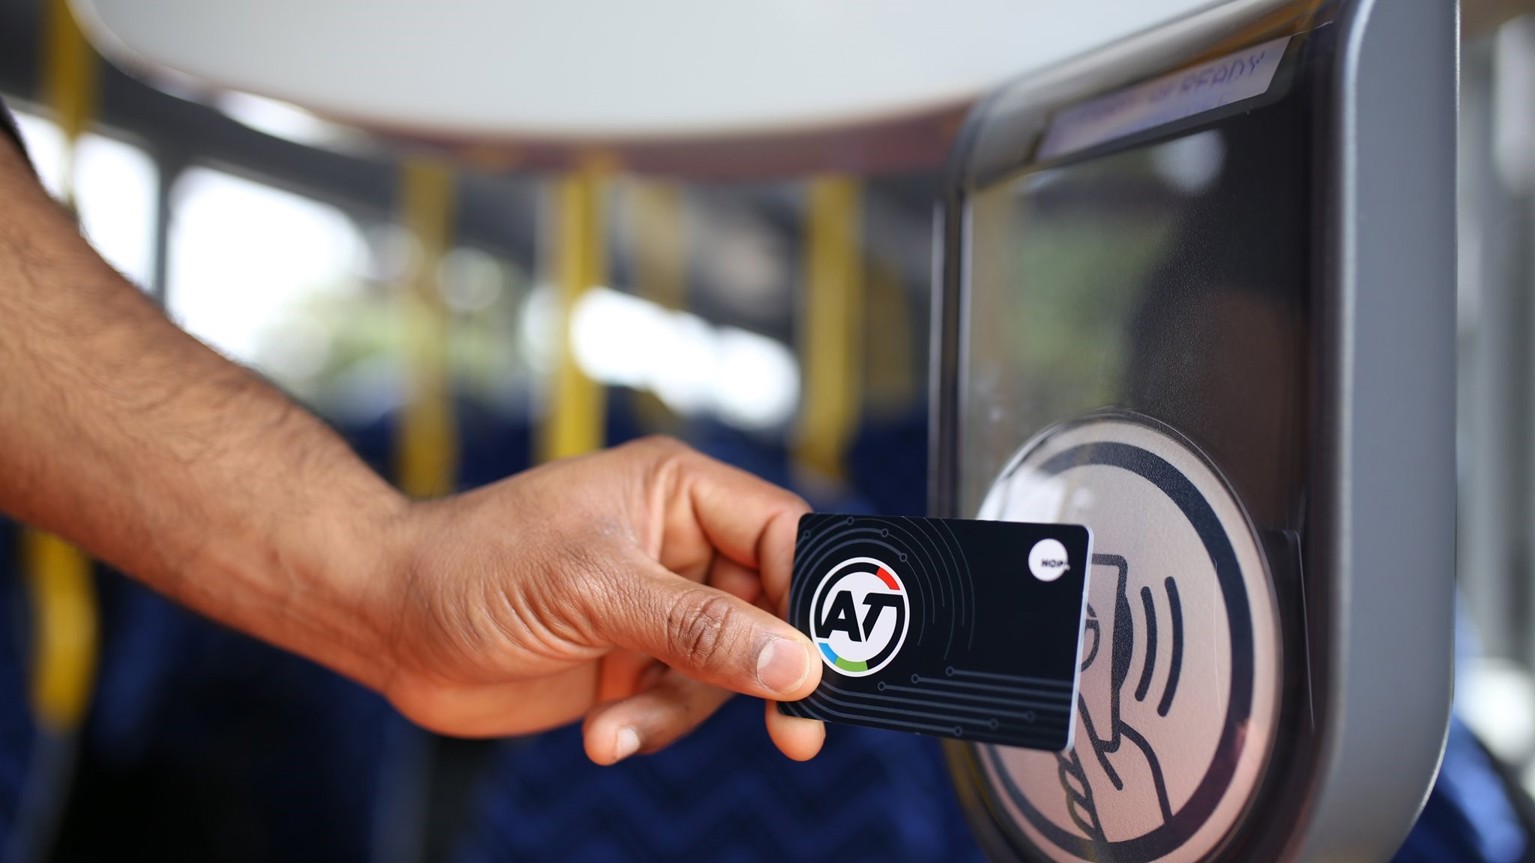 A public transport user is on a bus shown to hold their AT Hop card against the onboard card reader to tag off or on.